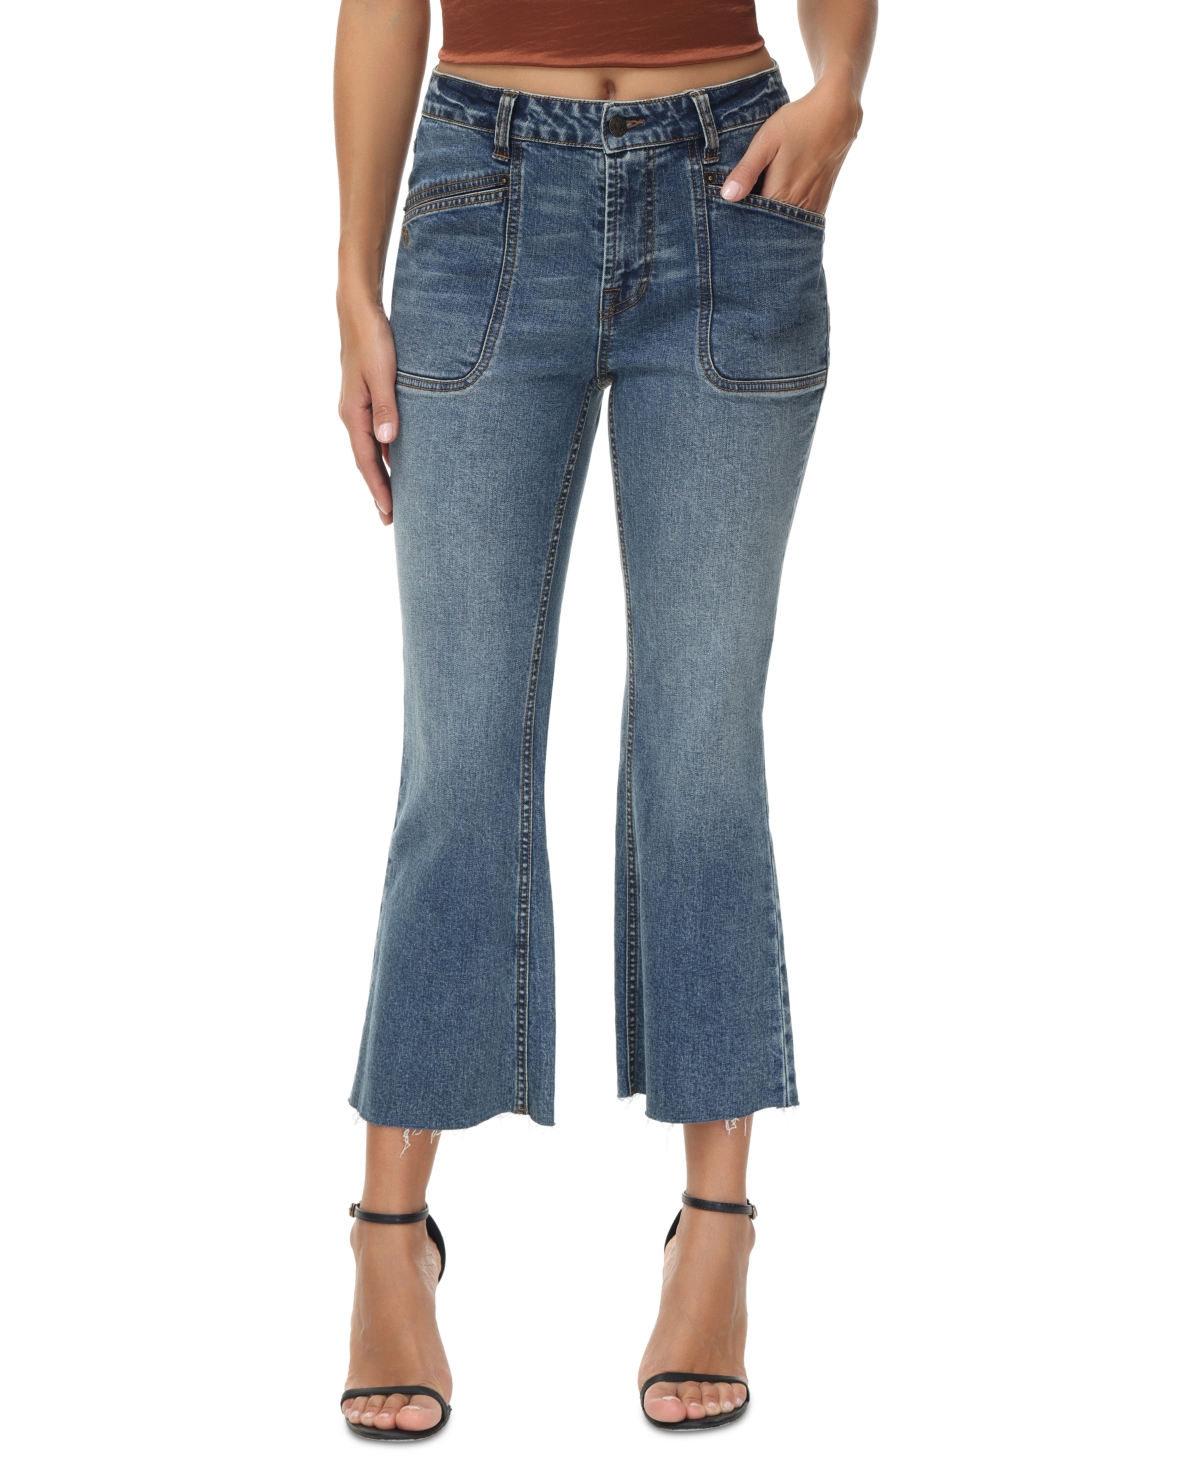 Women's Mid-Rise Cropped Boot-Cut Jeans - Mila Wash